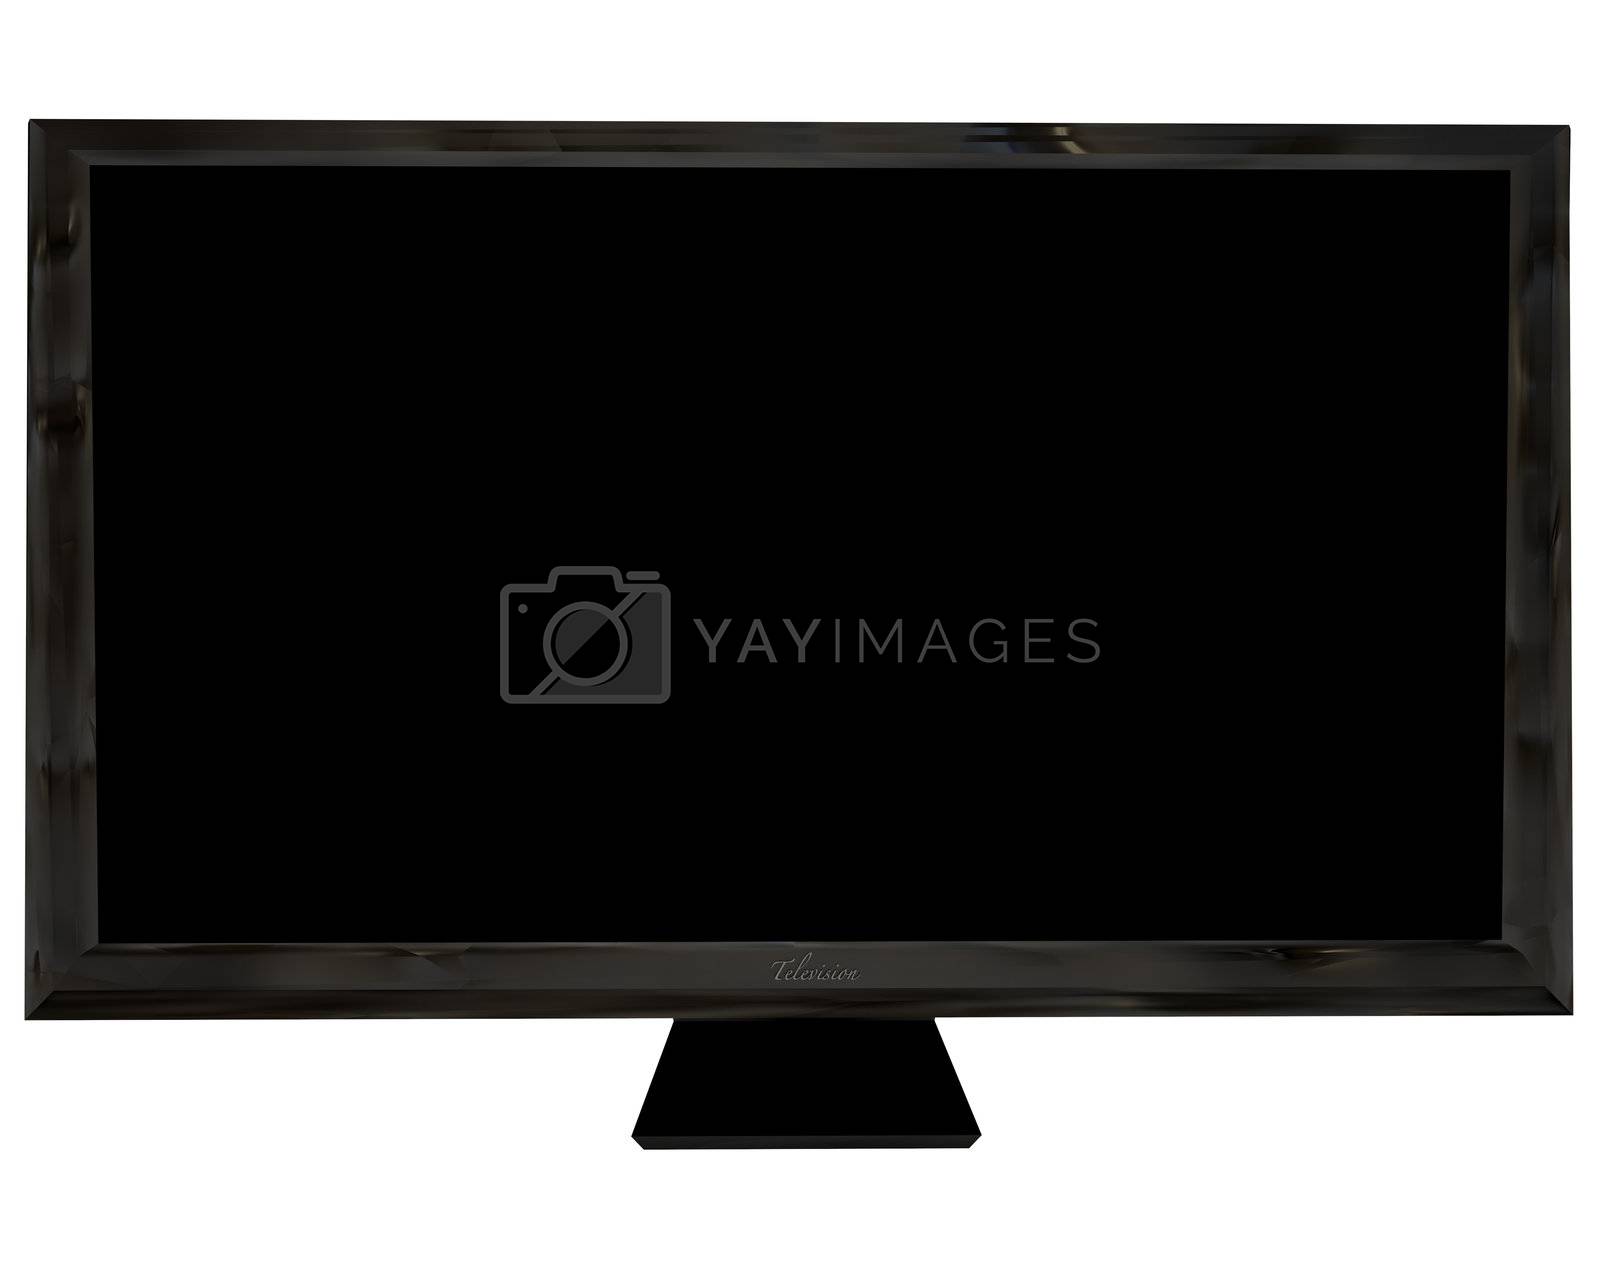 Royalty free image of television front by nicemonkey